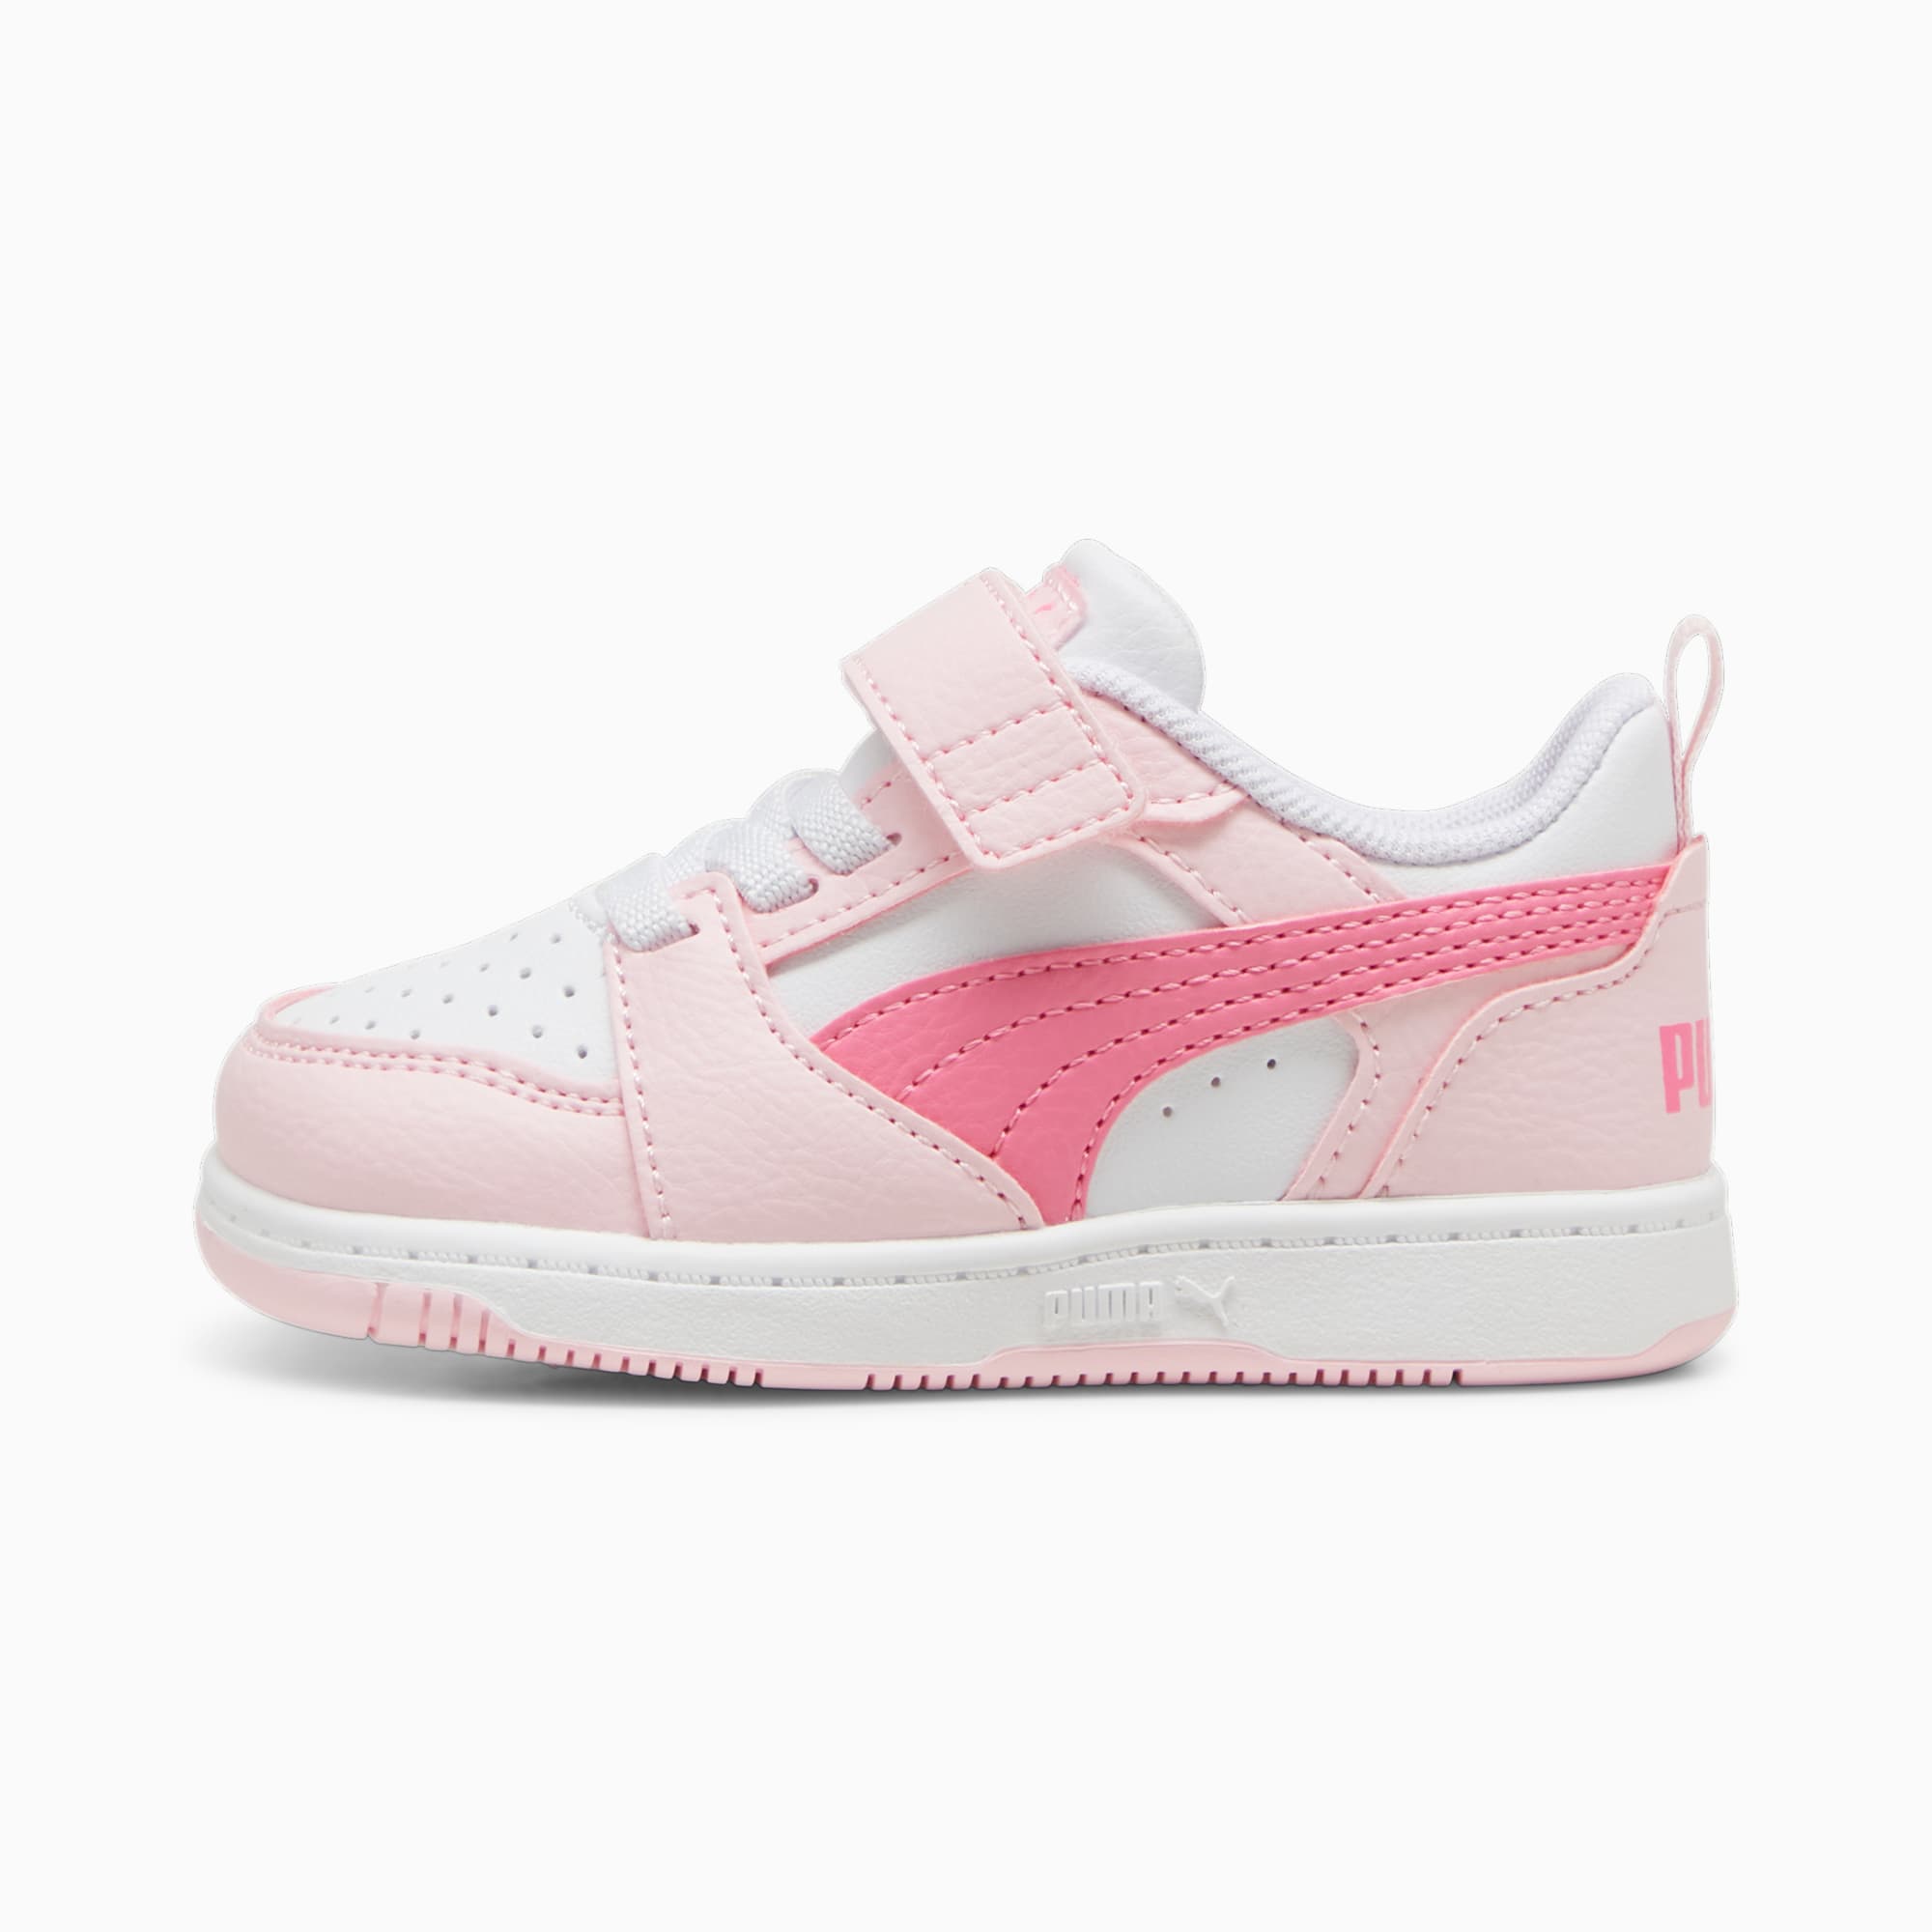 PUMA Rebound V6 Lo Toddlers' Sneakers, White/Fast Pink/Whisp Of Pink, Size 19, Shoes